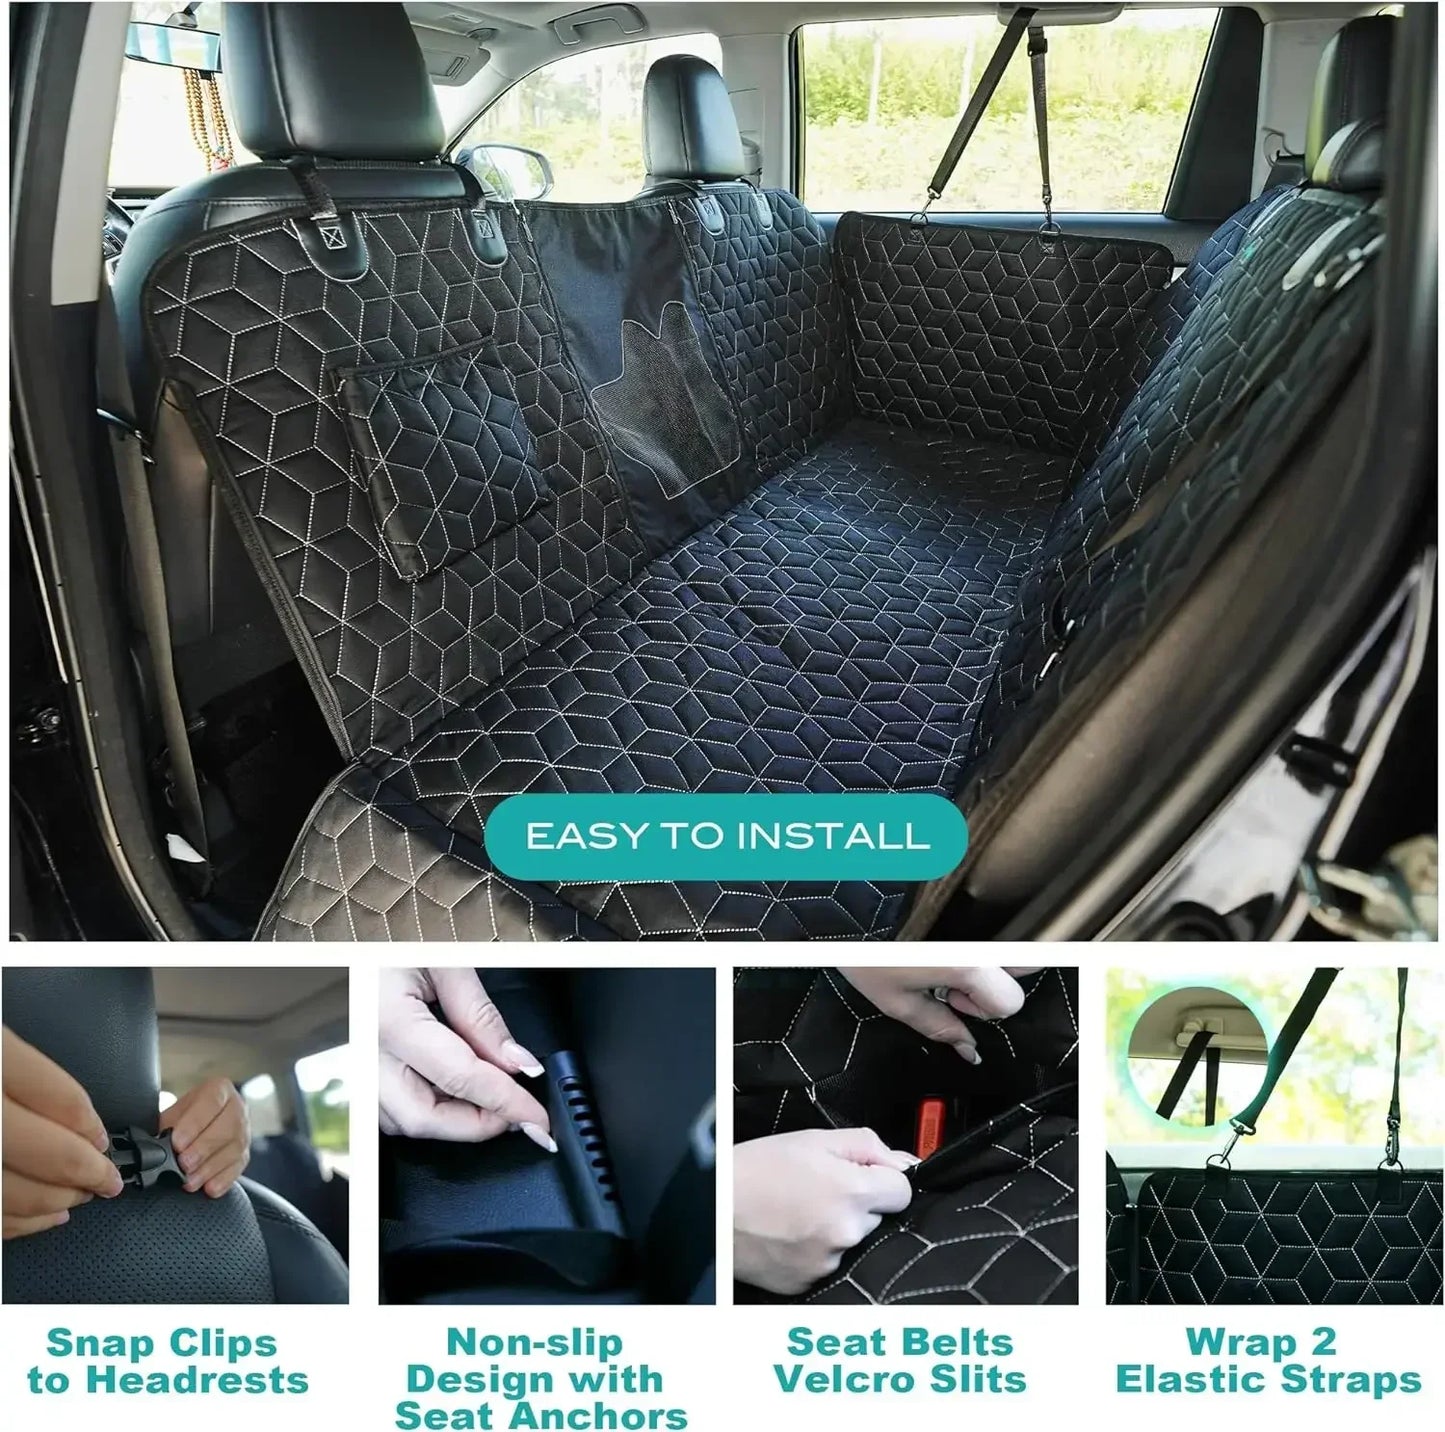 Heavy Durable Backseat Cover for Pet